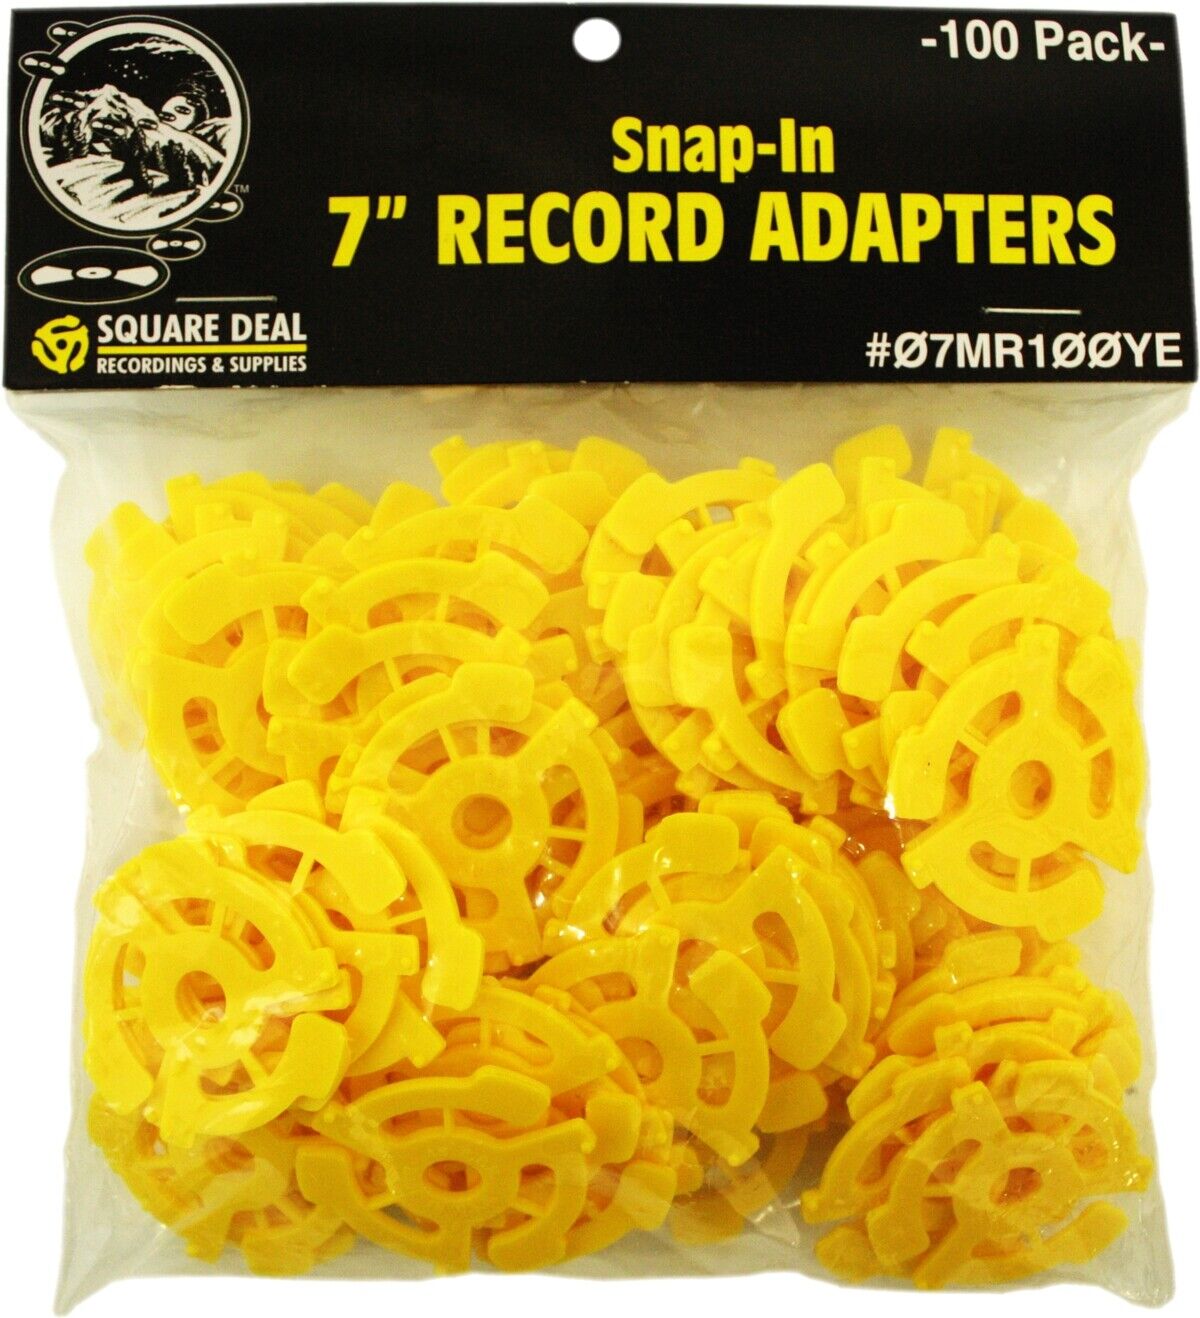 (100) Flat Yellow Adapters / Inserts for 7" 45rpm Vinyl Records 45s EP Single  Square Deal Recordings & Supplies 07MR100YE